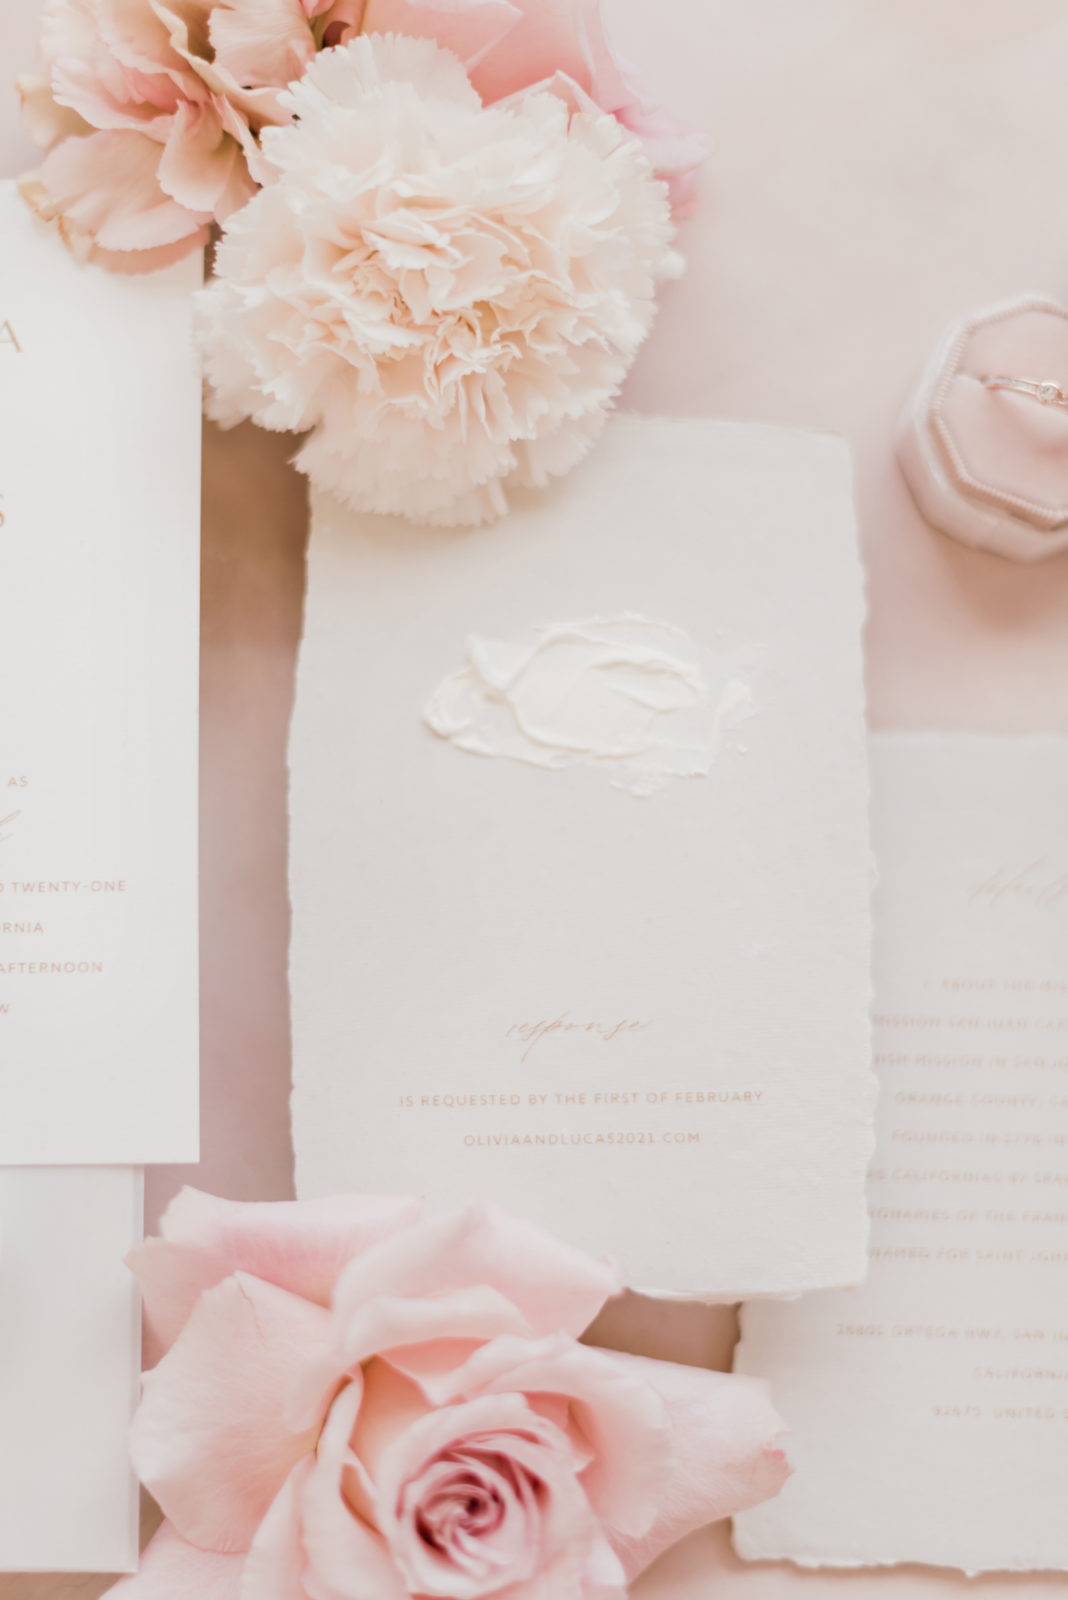 Delicate white and pink wedding stationery inspiration by Plush Invites